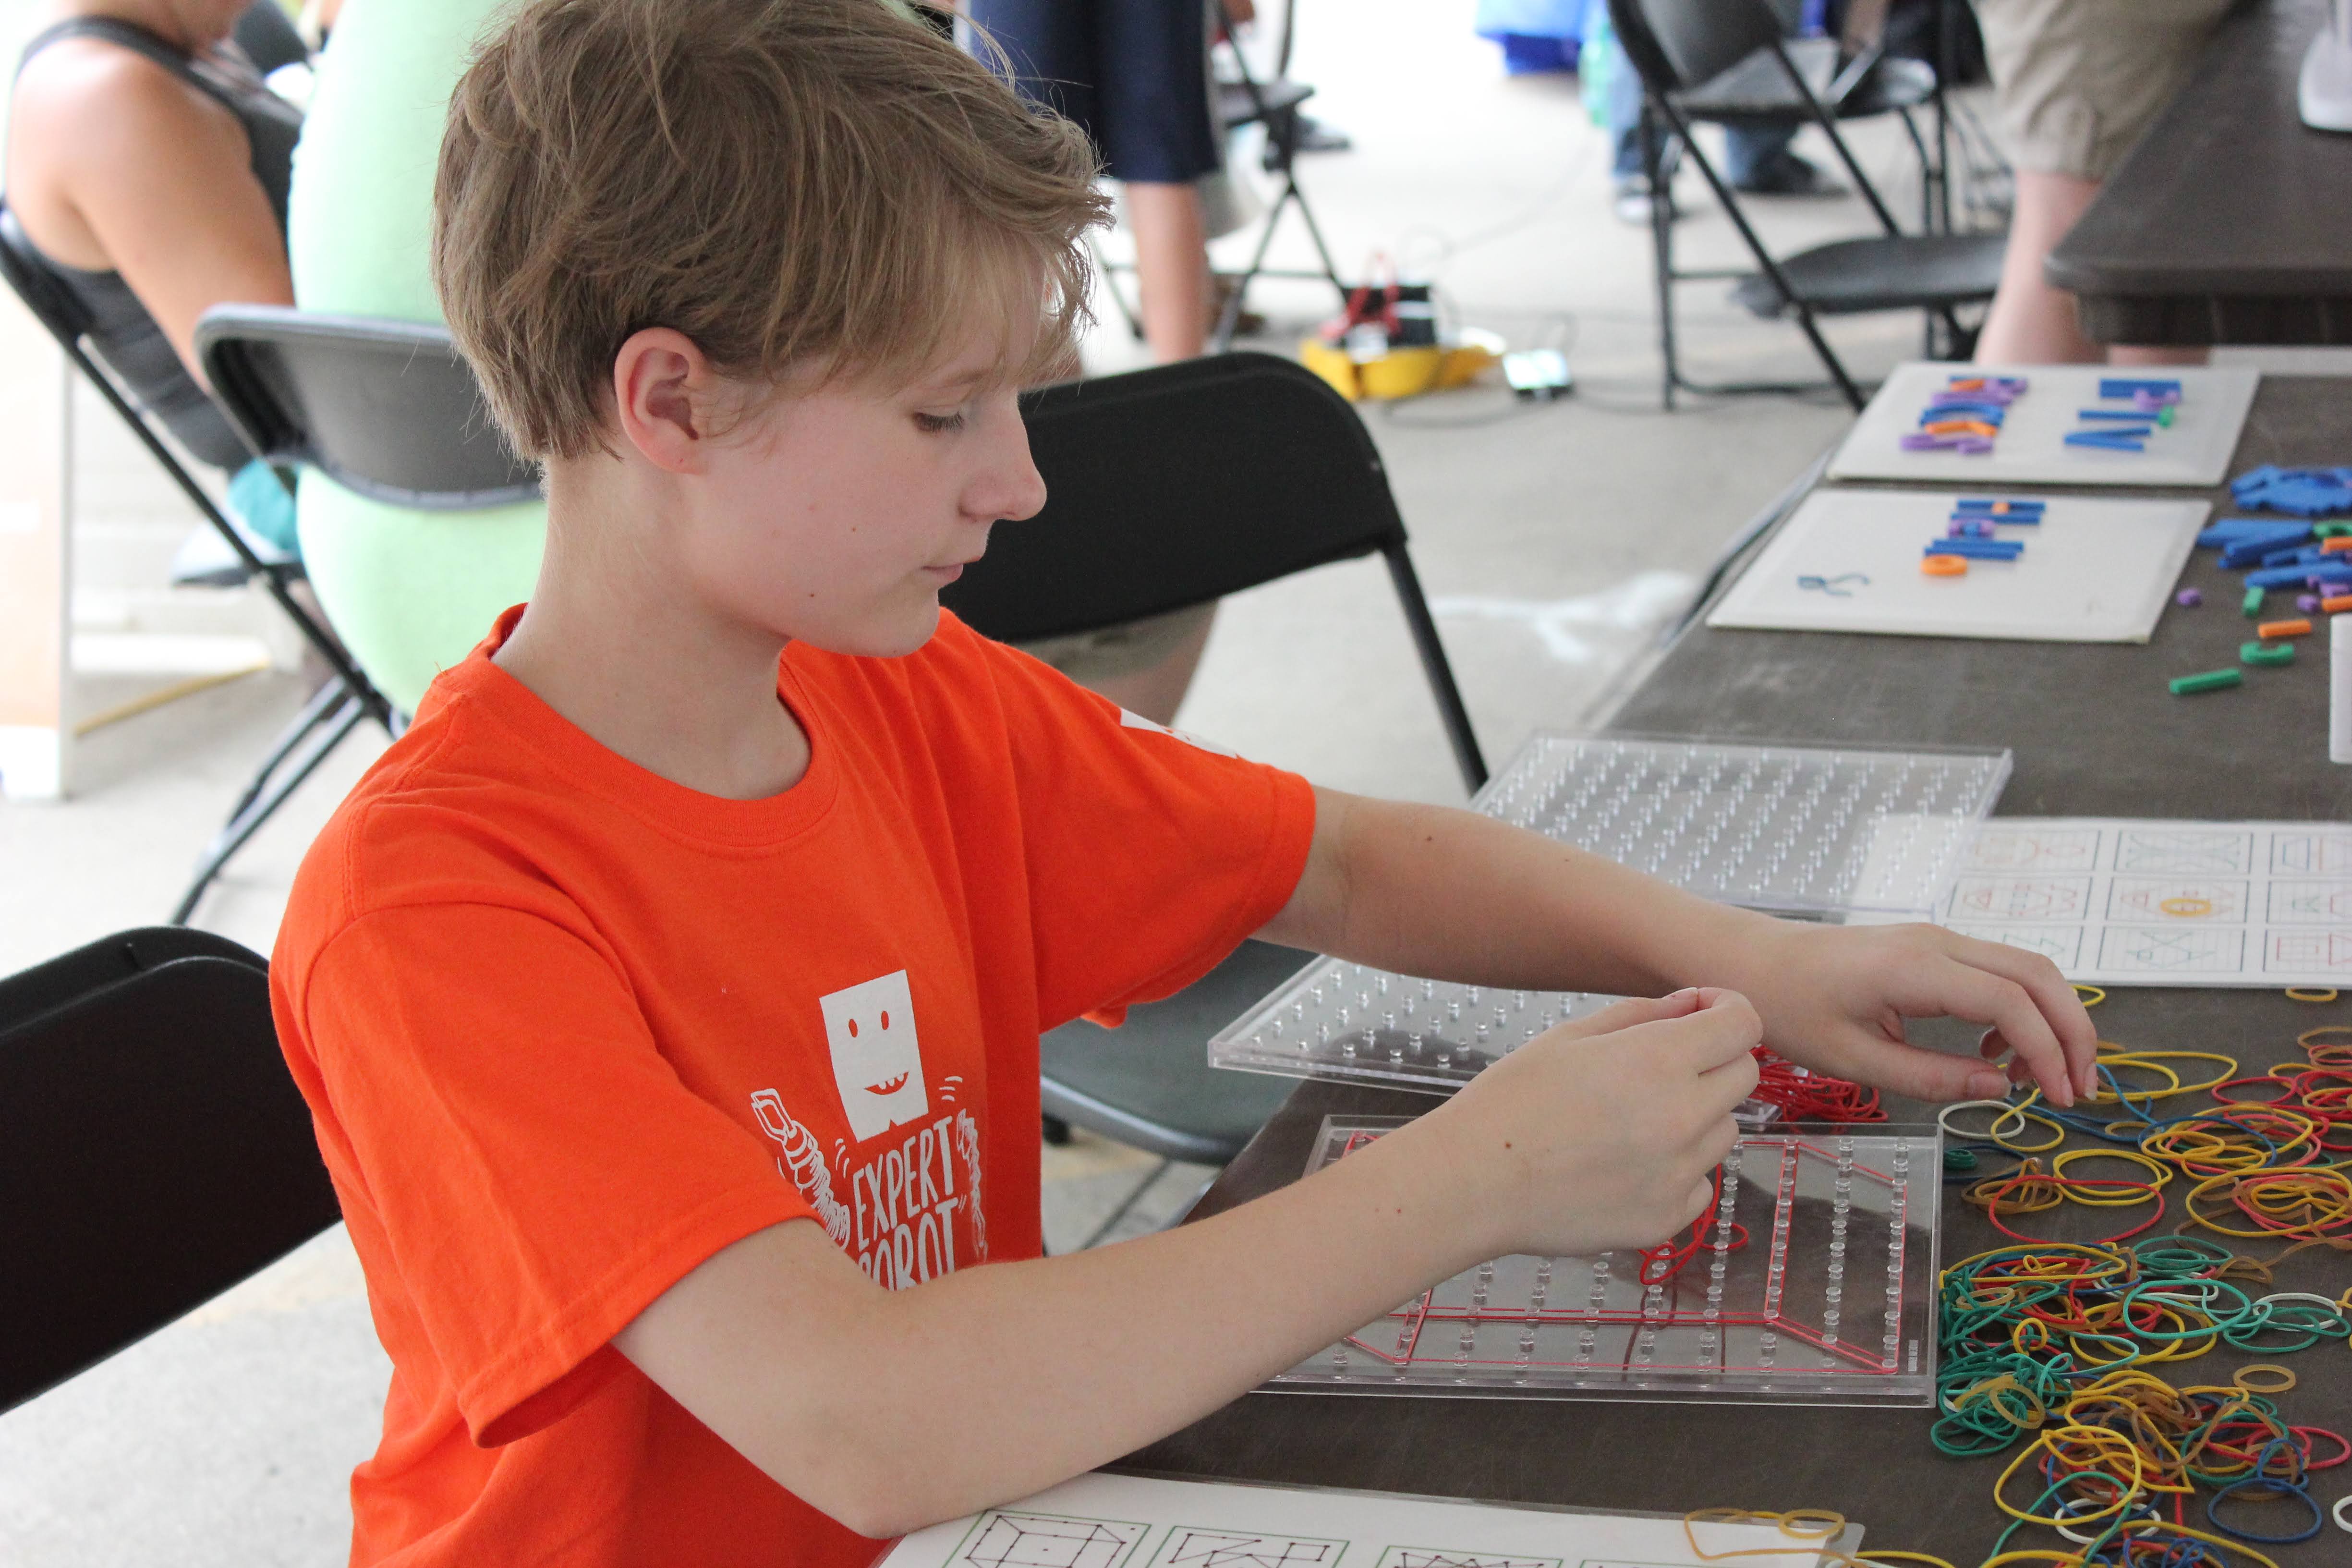 Youth participates in hands-on activity at STEM Day at the Fair